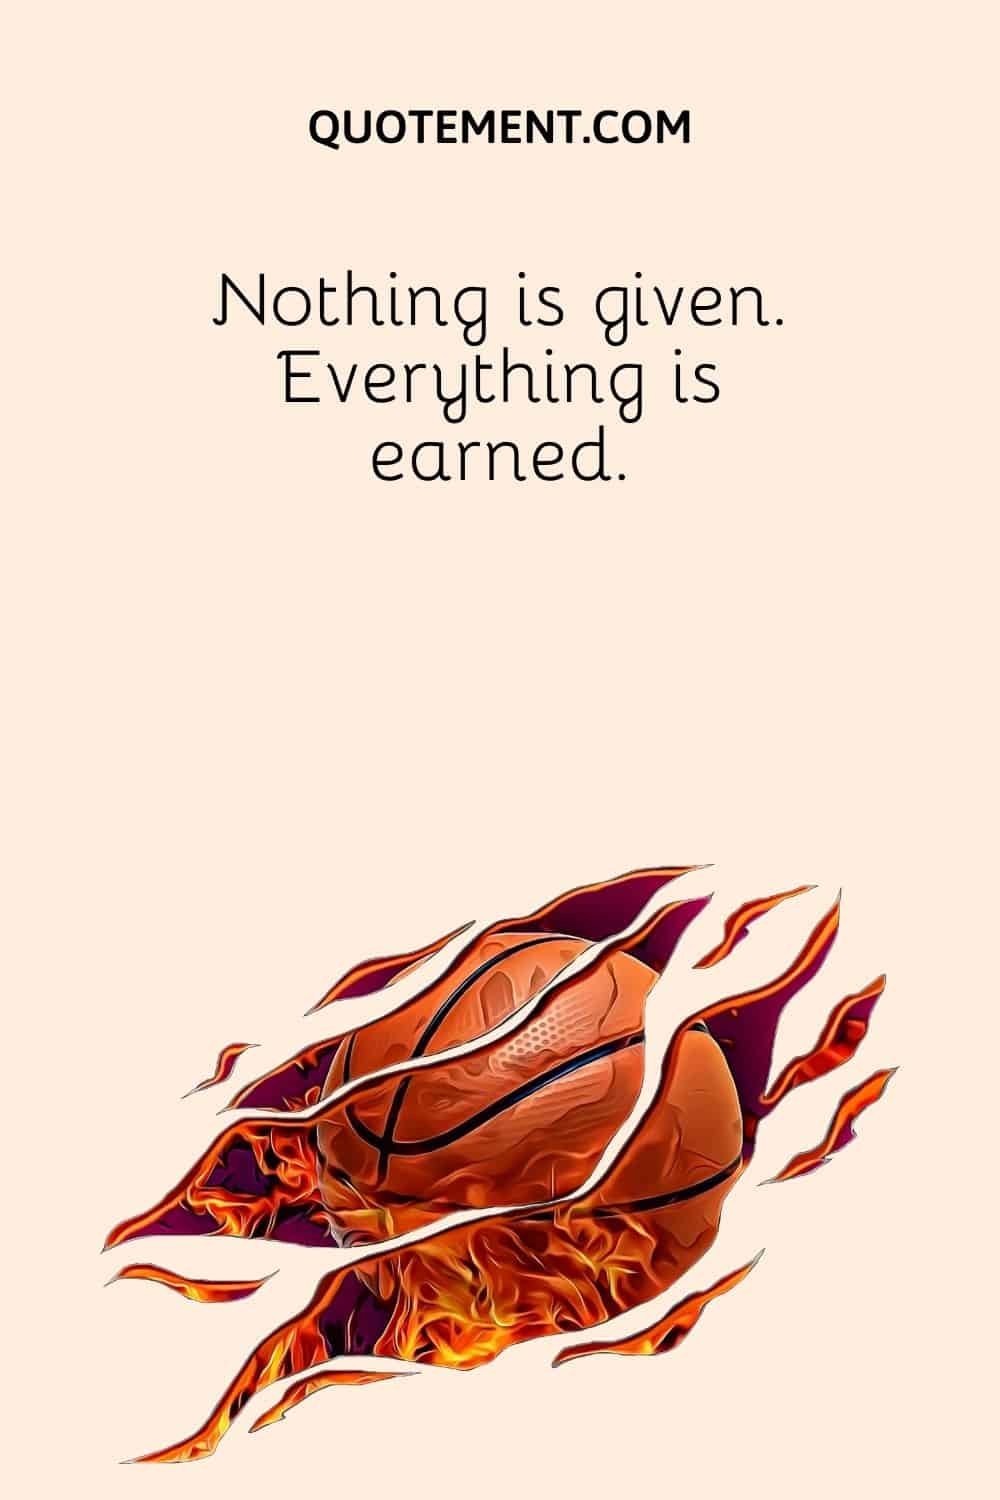 Everything is earned.